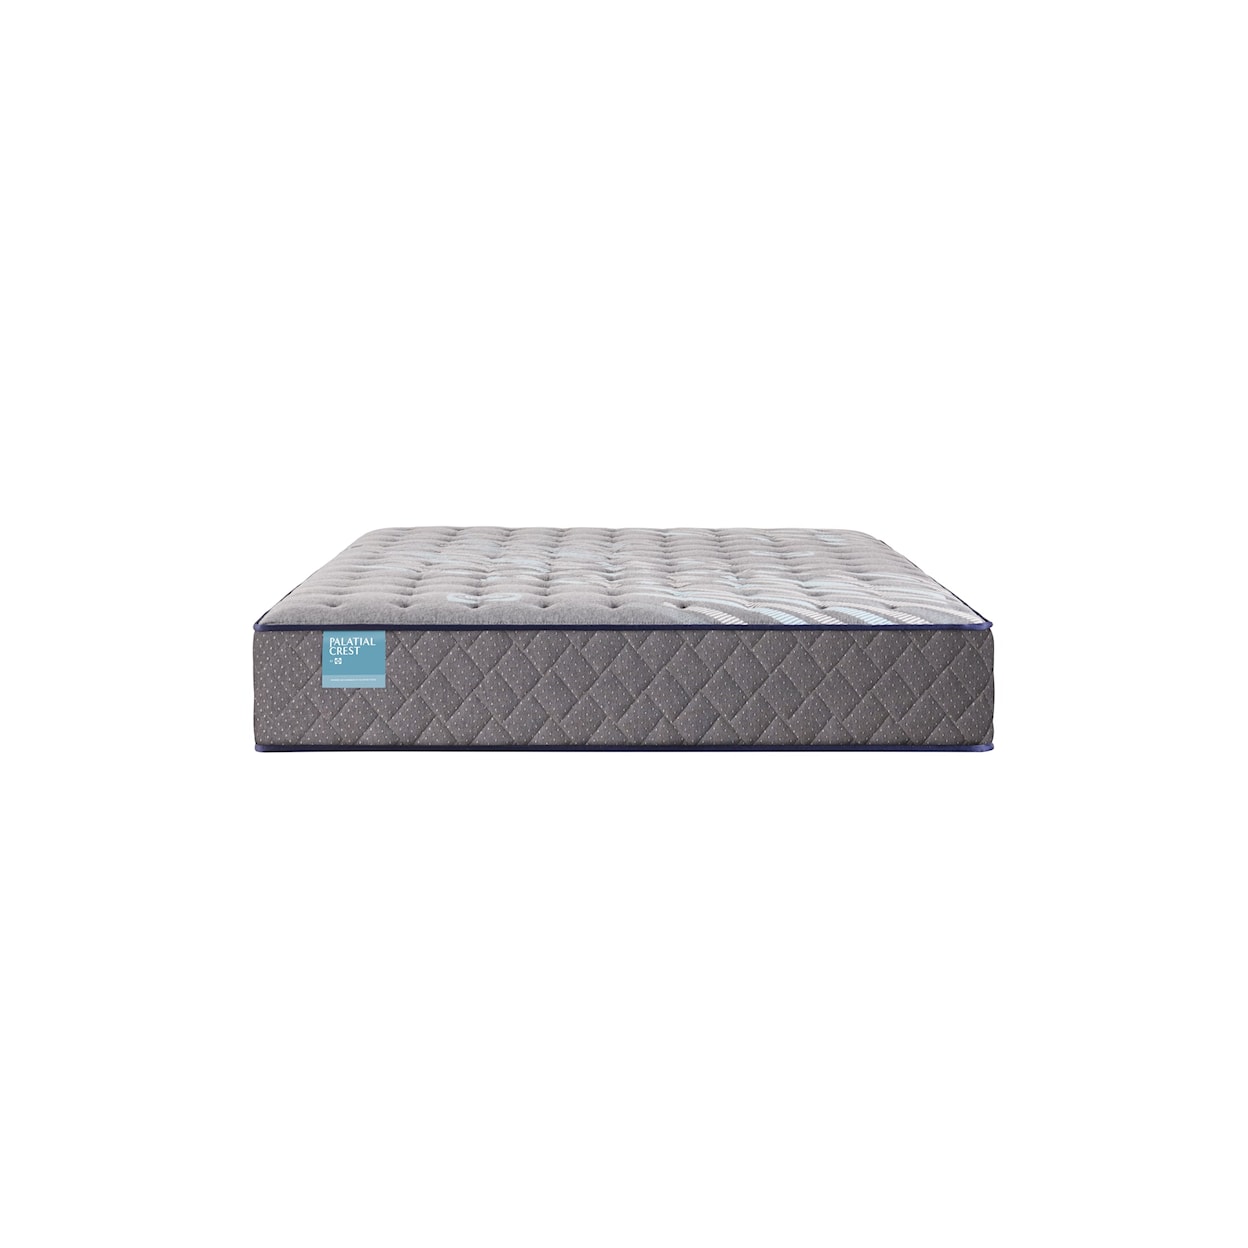 Sealy Palatial Crest S6 Cathedral Cove Firm TT Queen Mattress